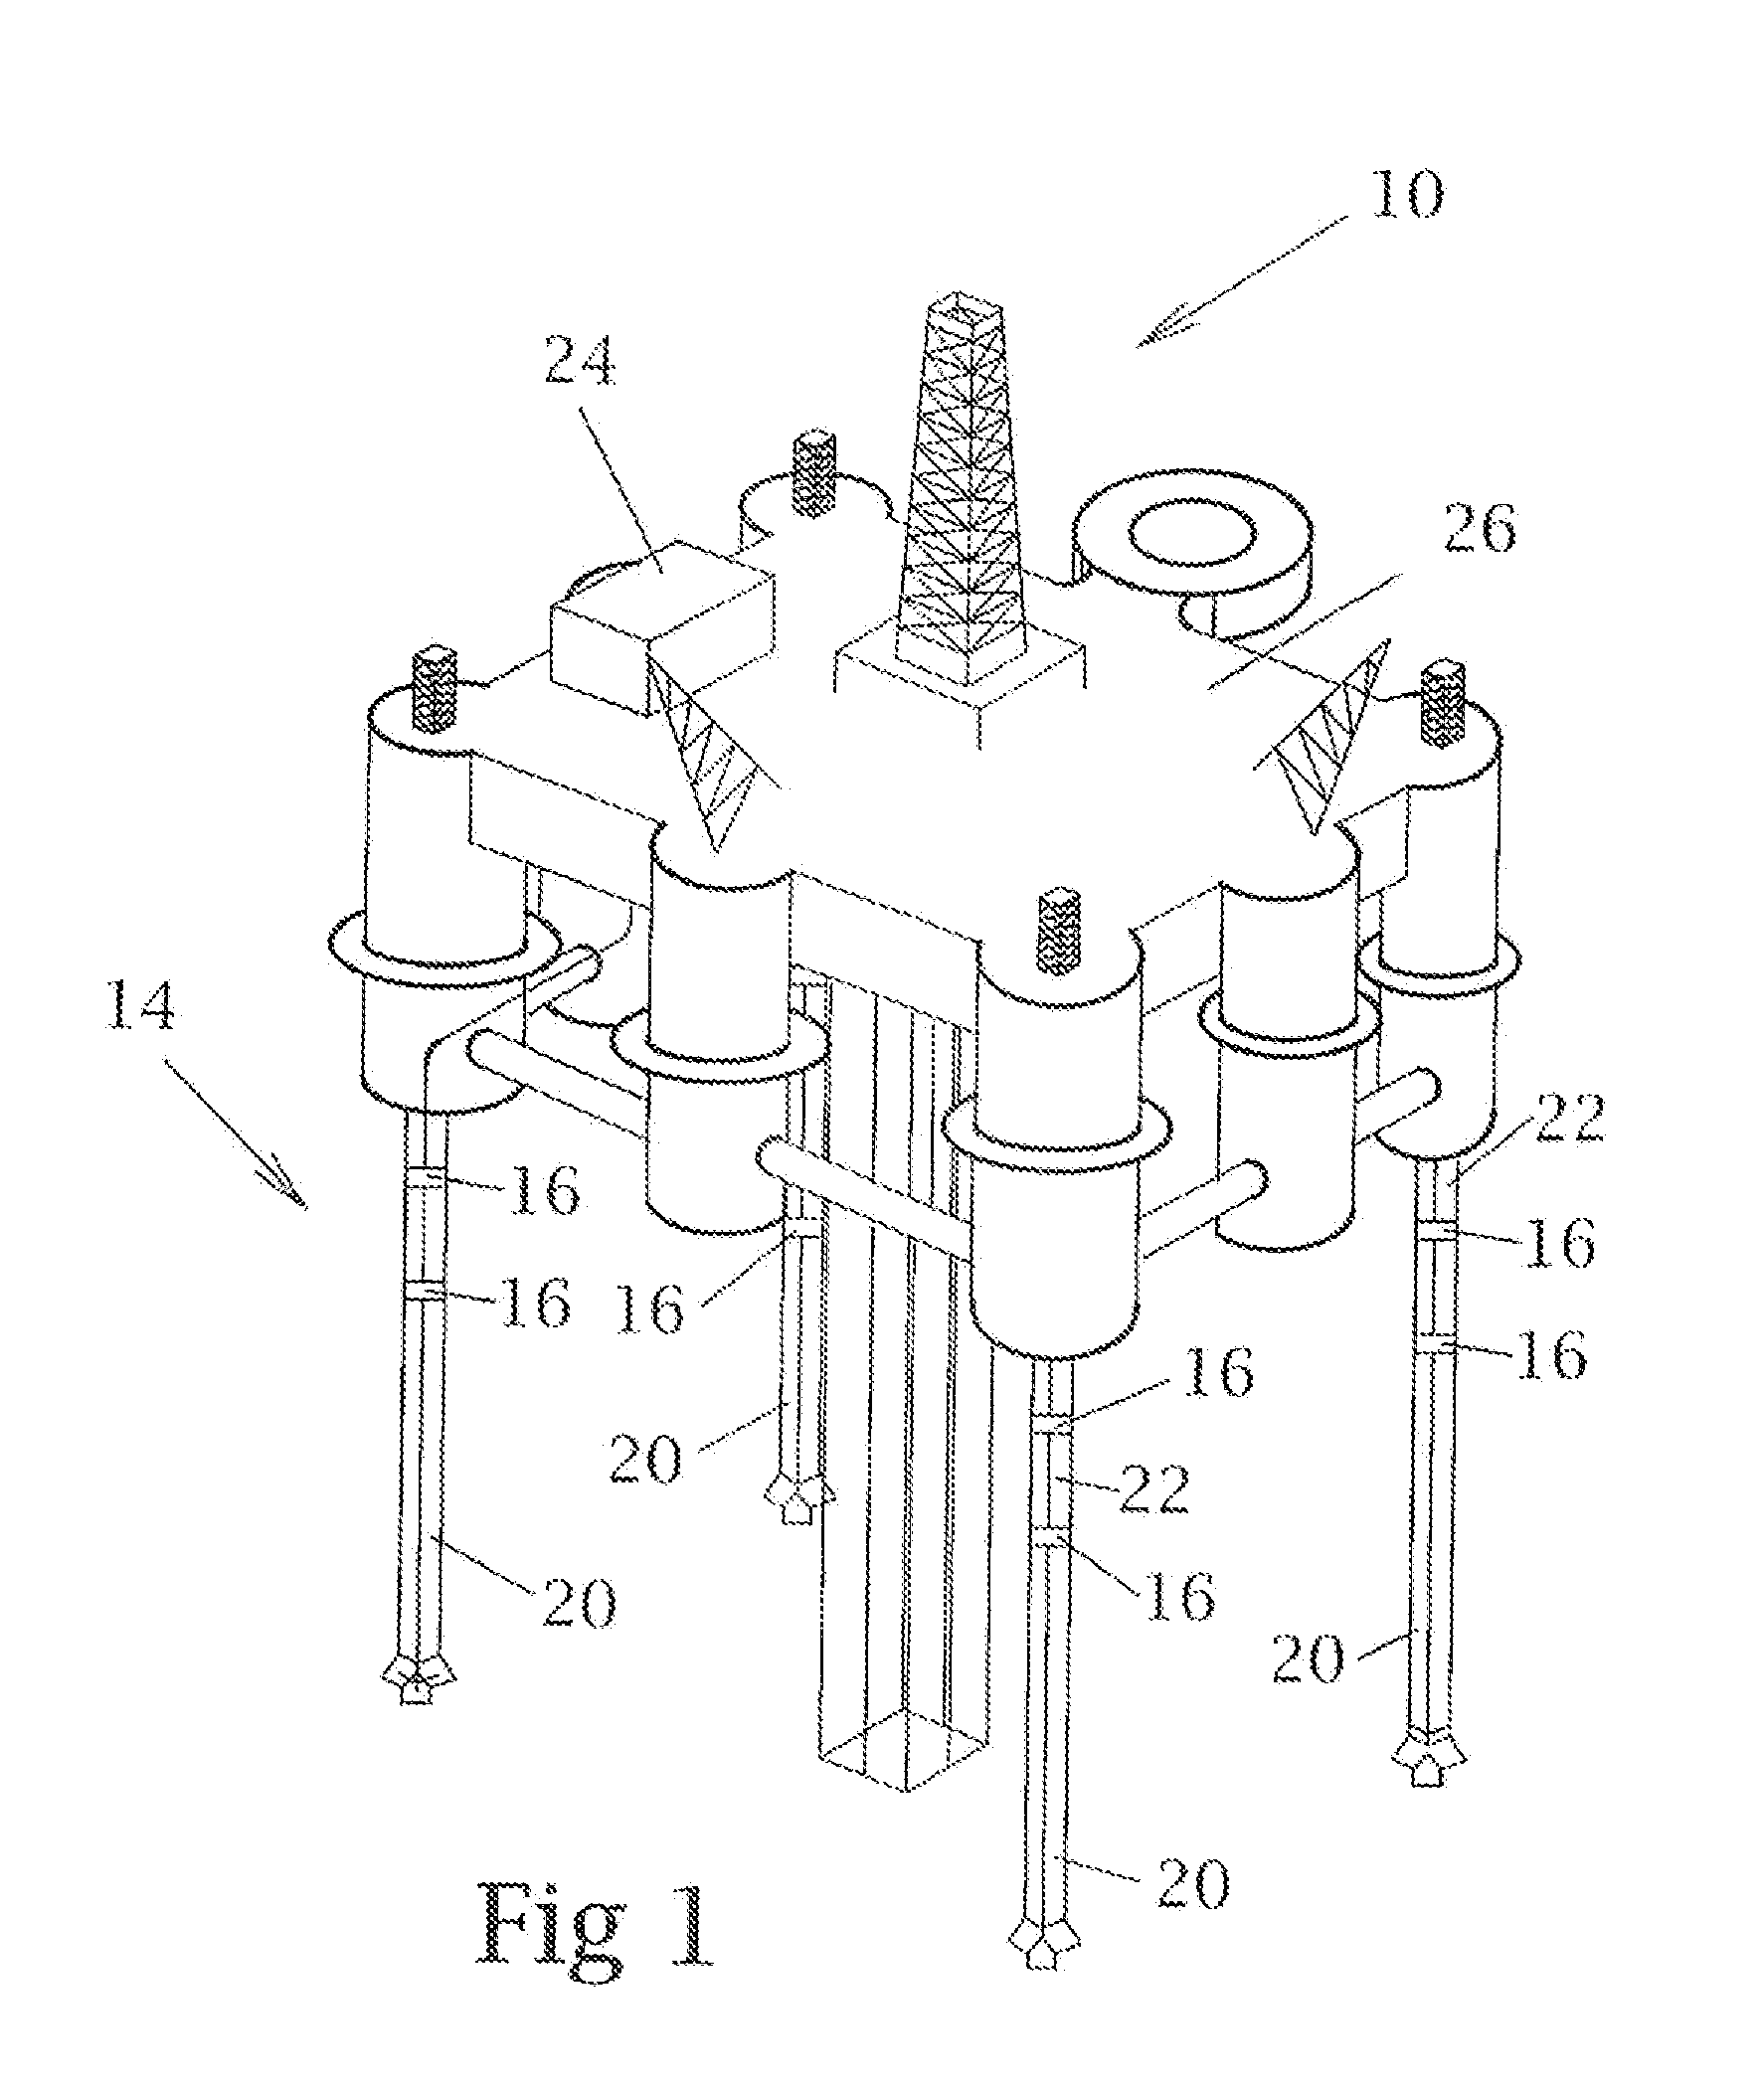 Apparatus and Method for Monitoring the Mechanical Properties of Subsea Longitudinal Vertical Components in Offshore Drilling and Production Applications